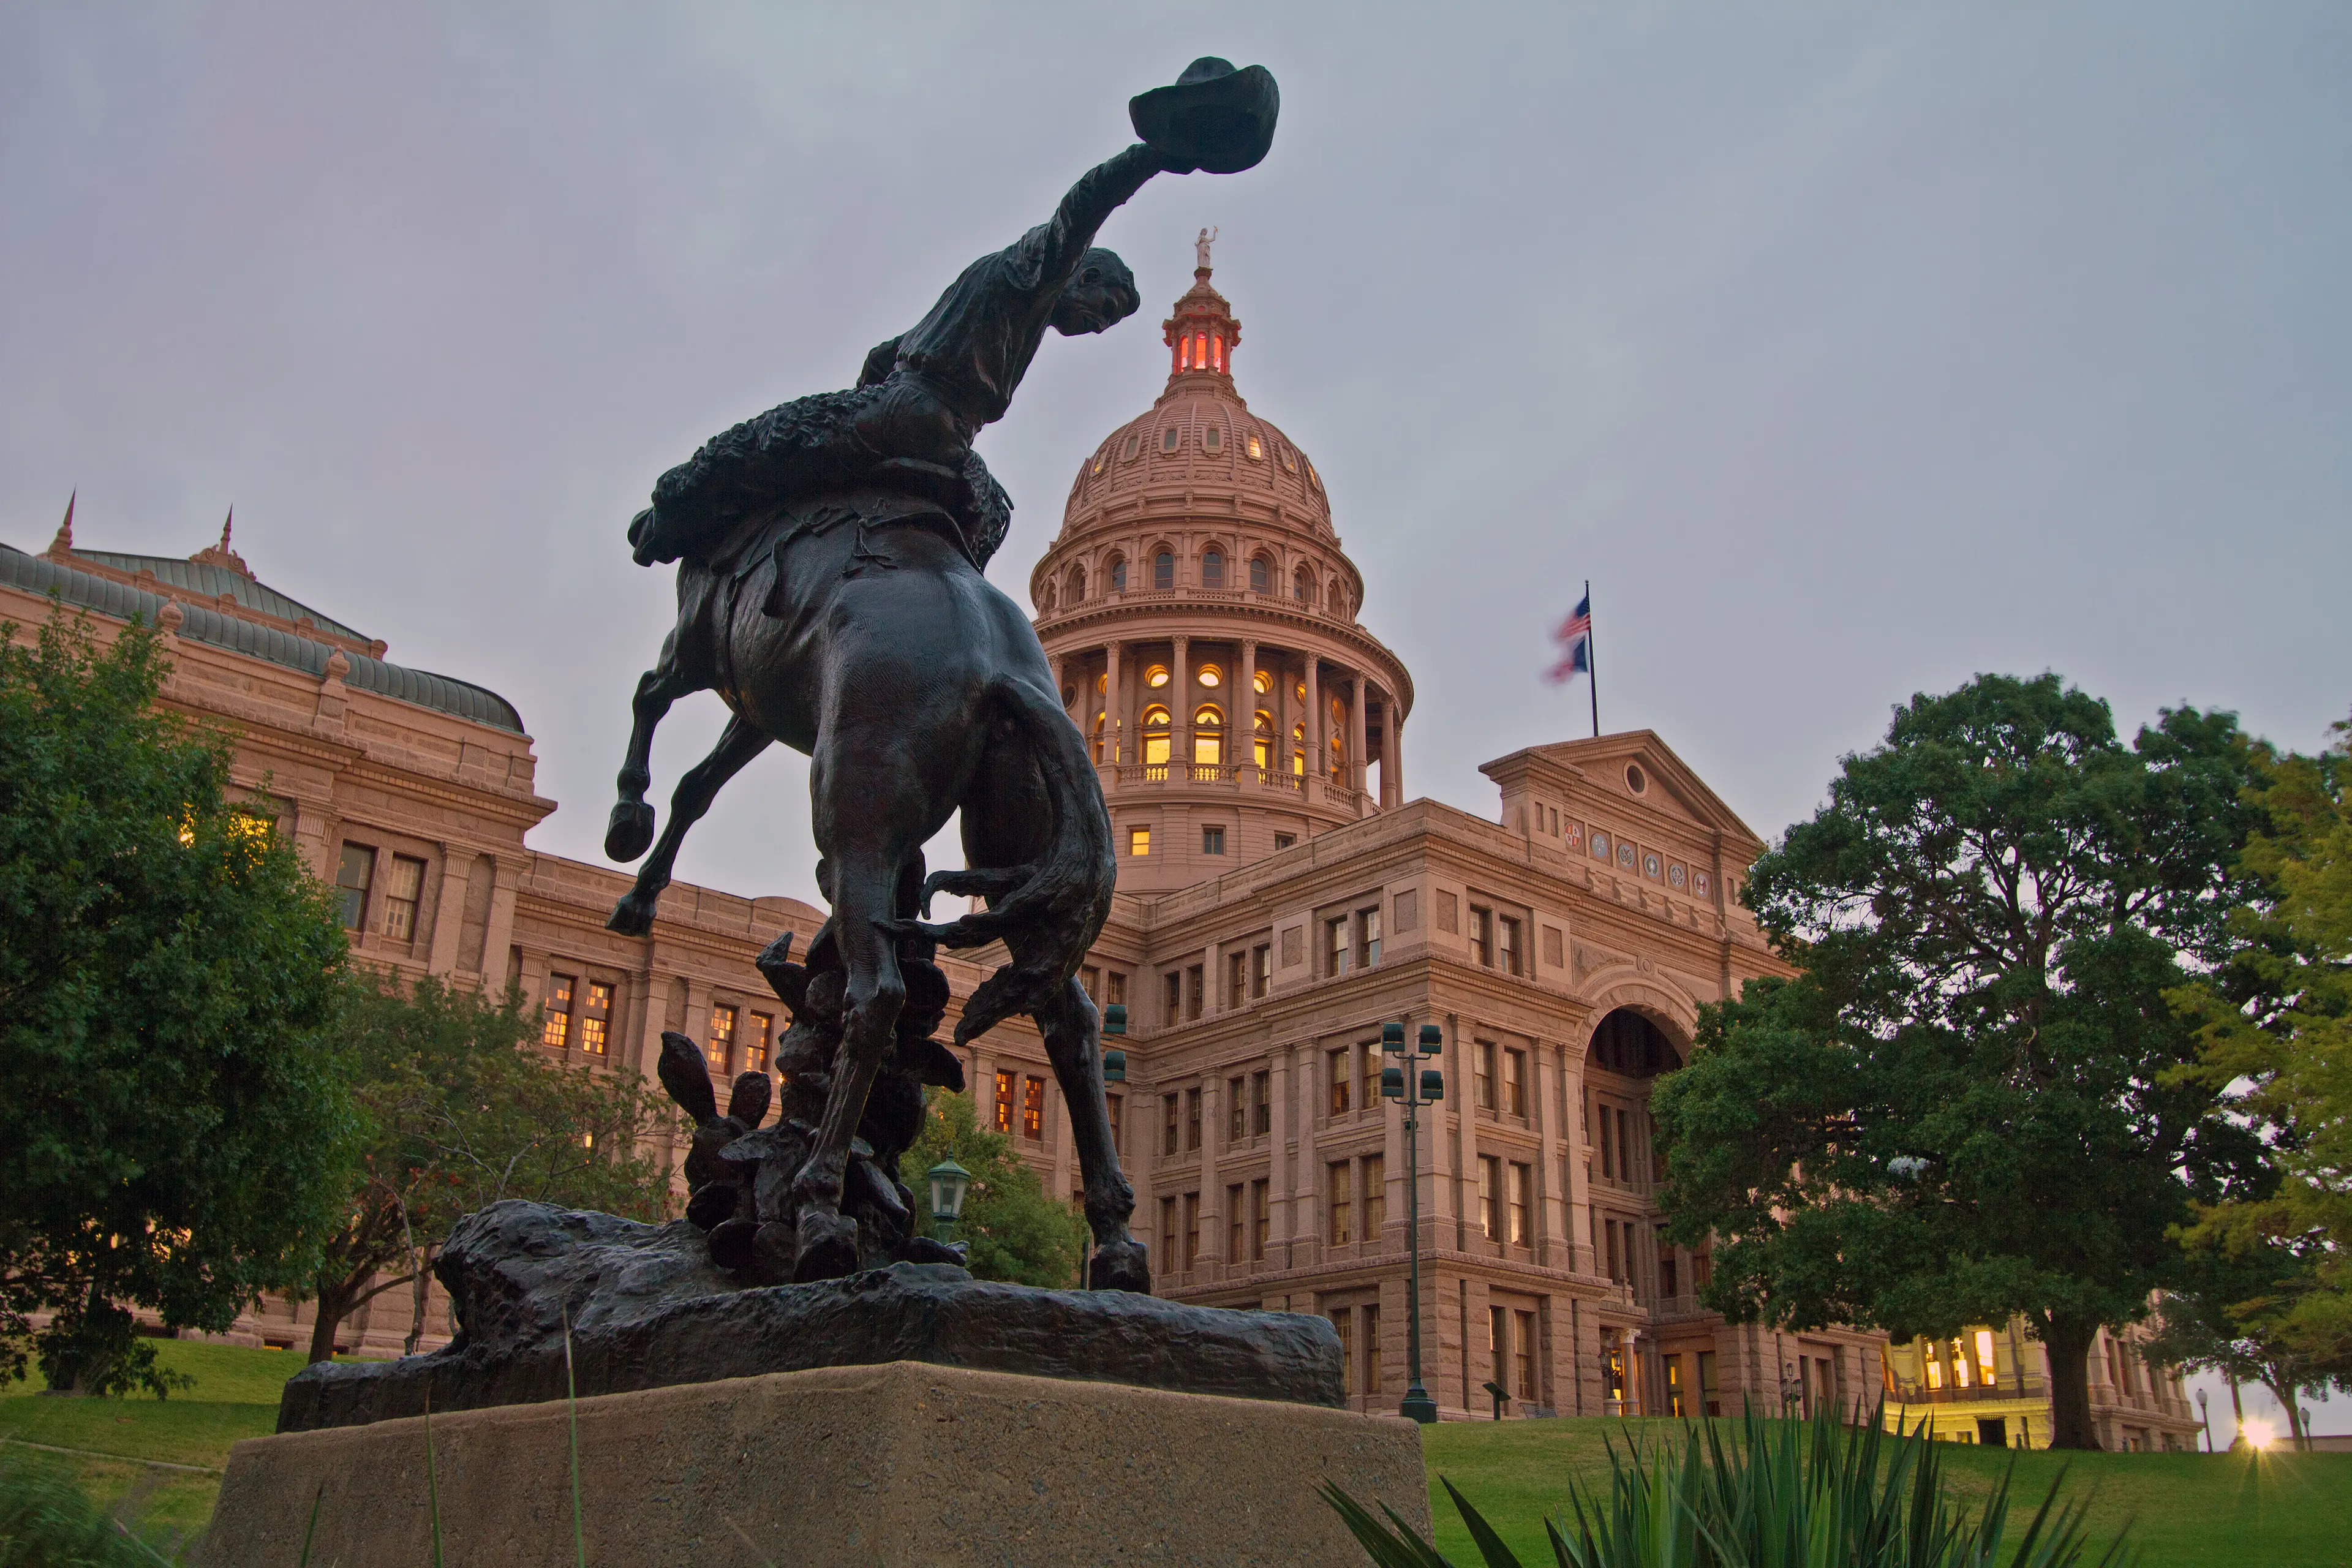 Cowboy Memorial in front of Texas Capitol dome